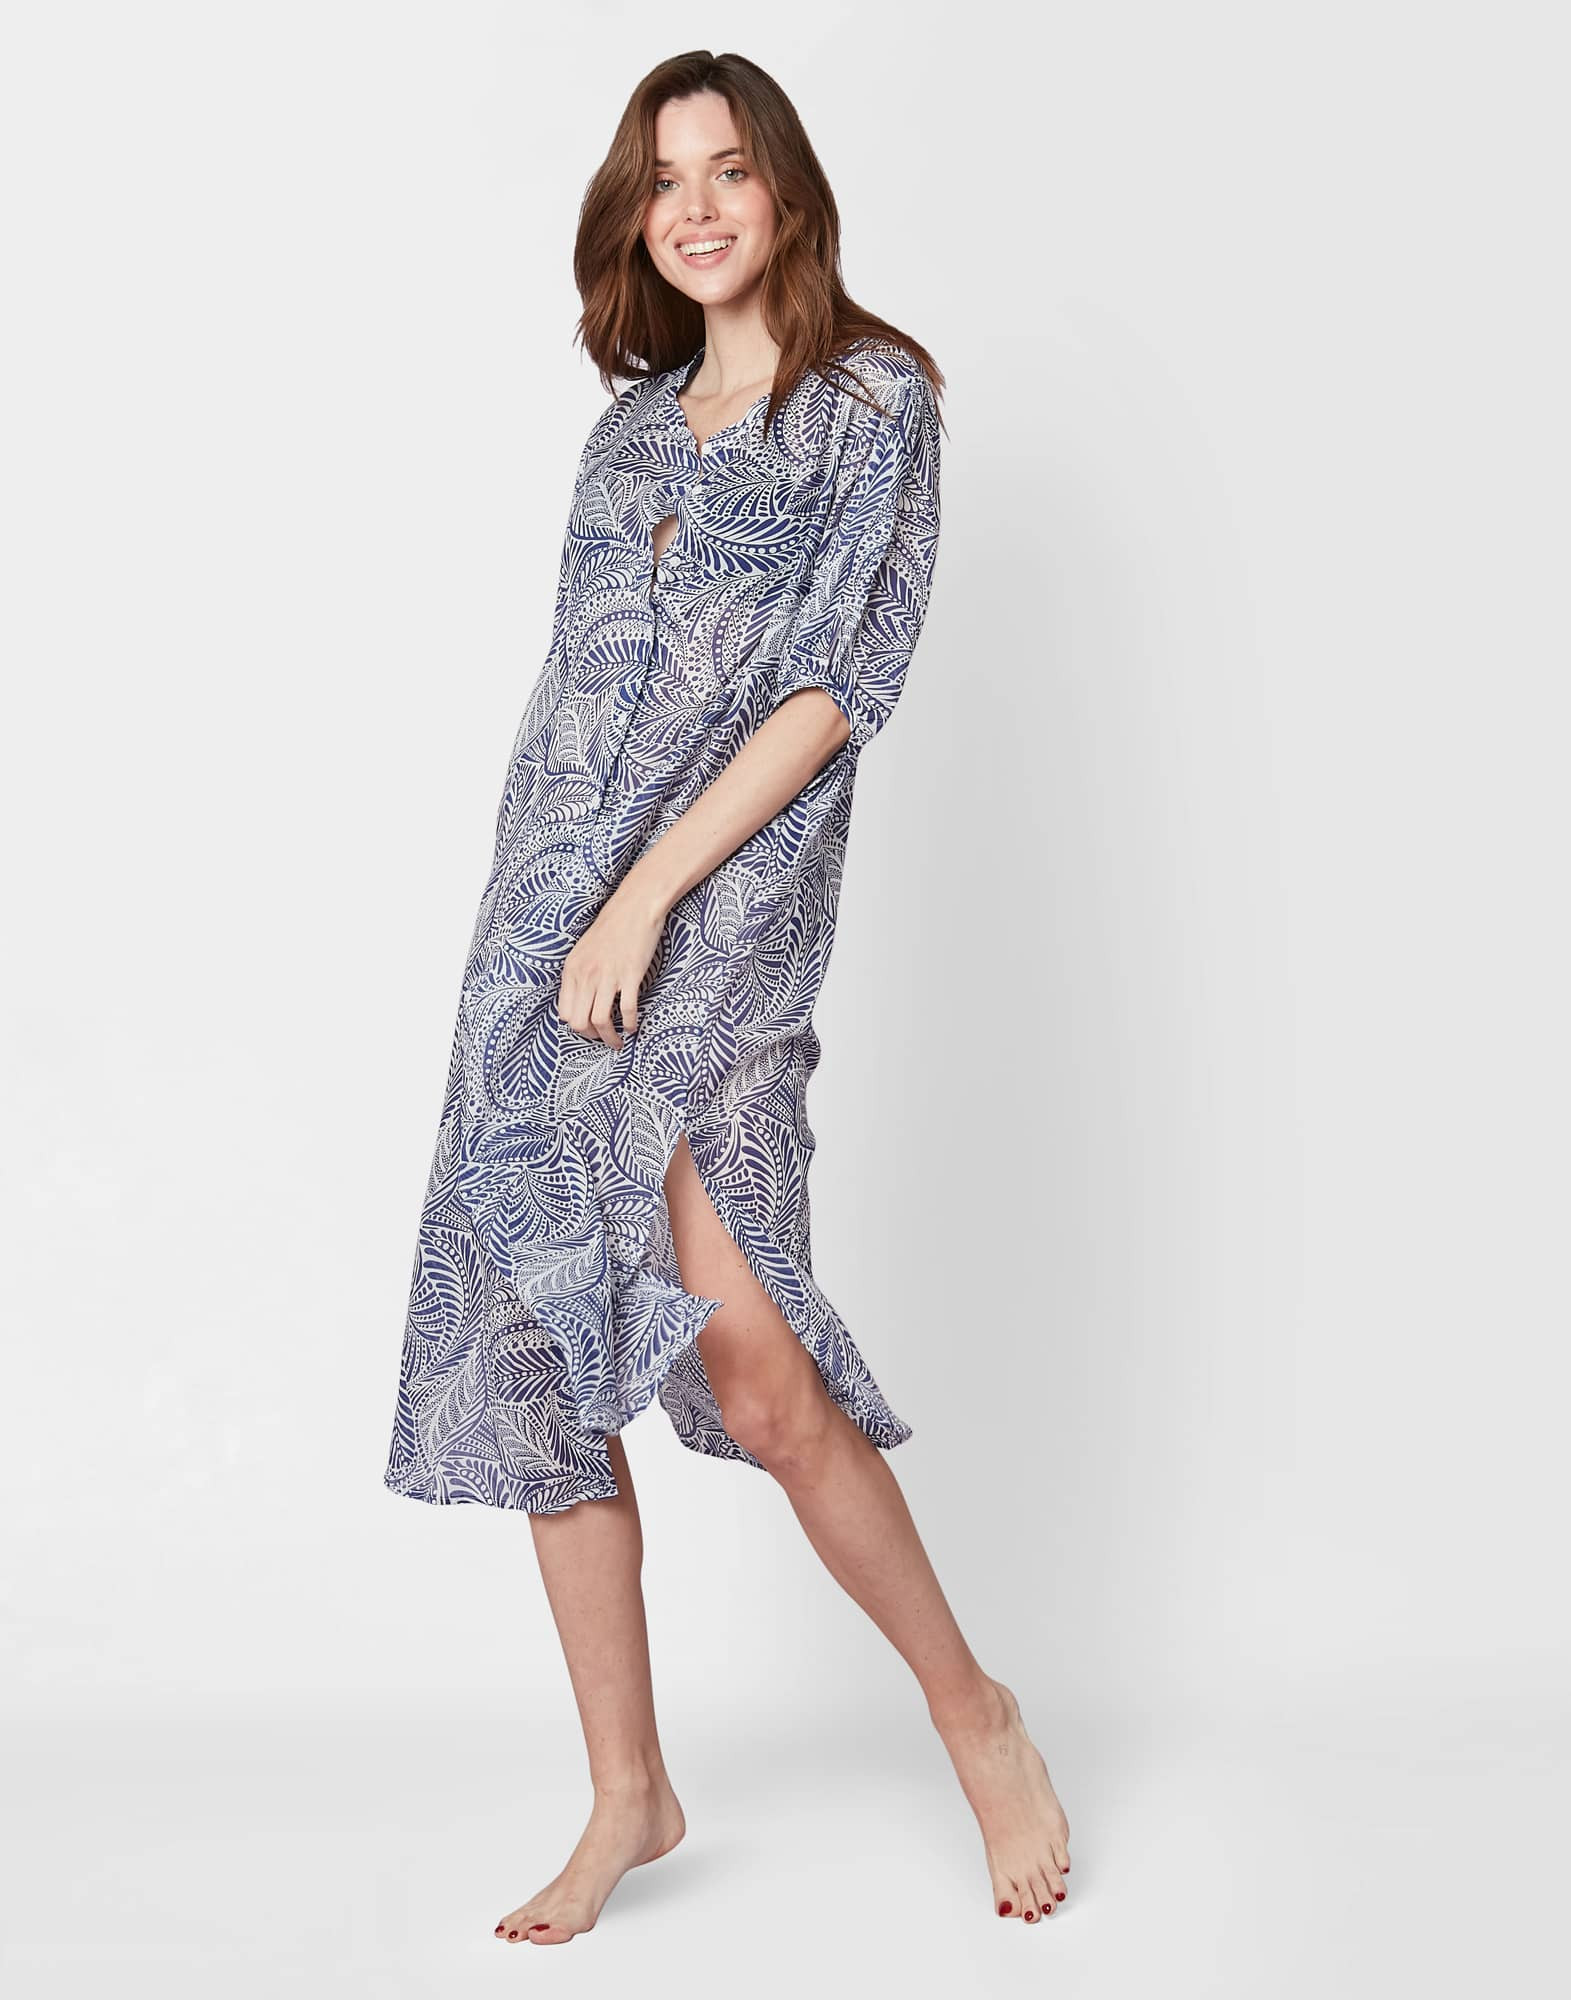 Shirt-style dress in patterned cotton voile PALM SPRINGS 505 blue